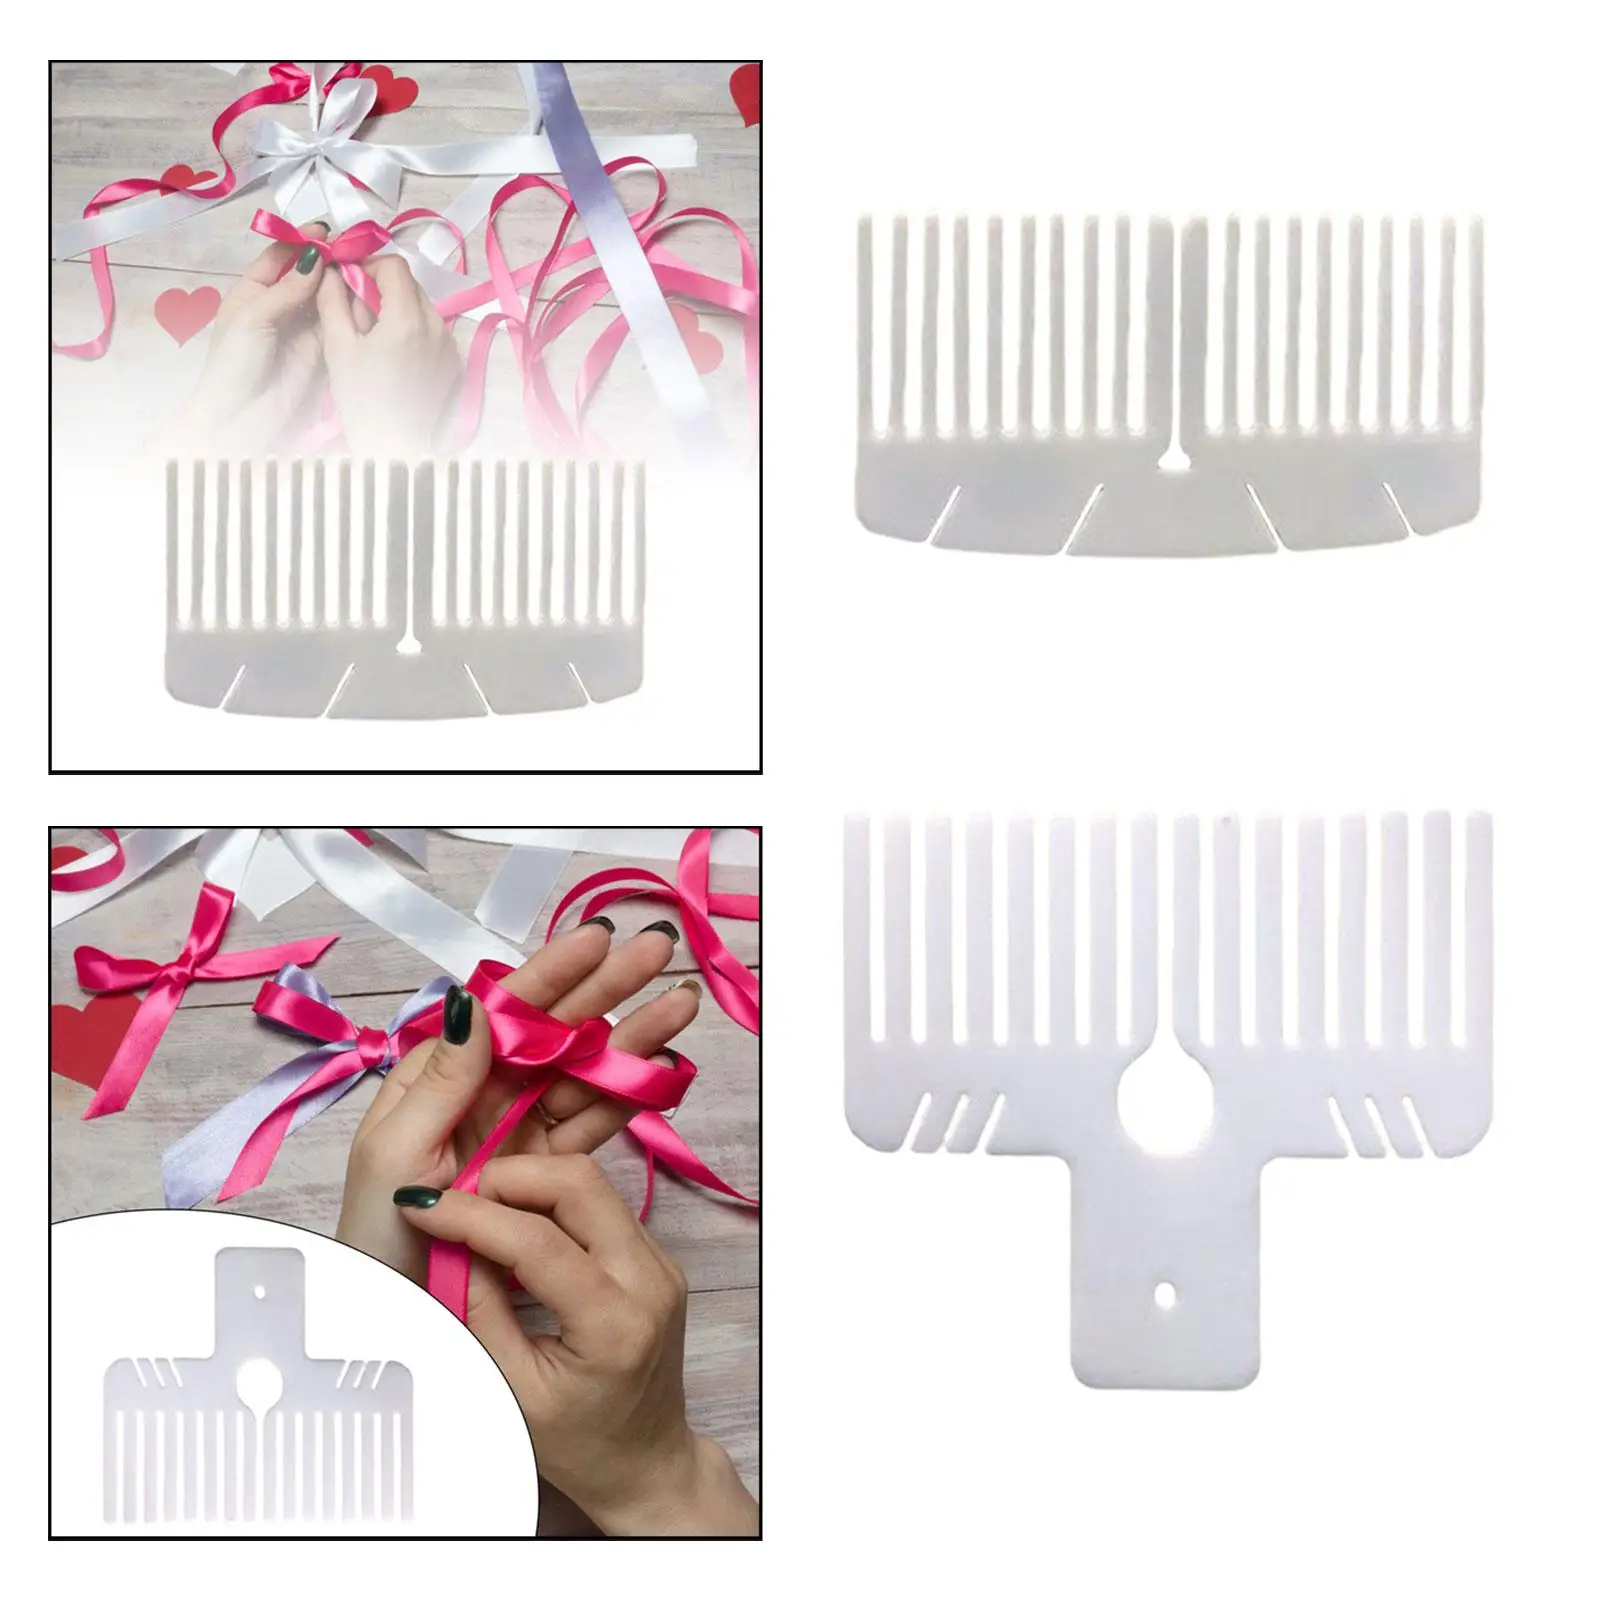 Bow Maker for Ribbon Wreath Bow Maker Tool Gifts Bows Hair Bows Easy to Use Handmade Bow Making Tool for DIY Party Create